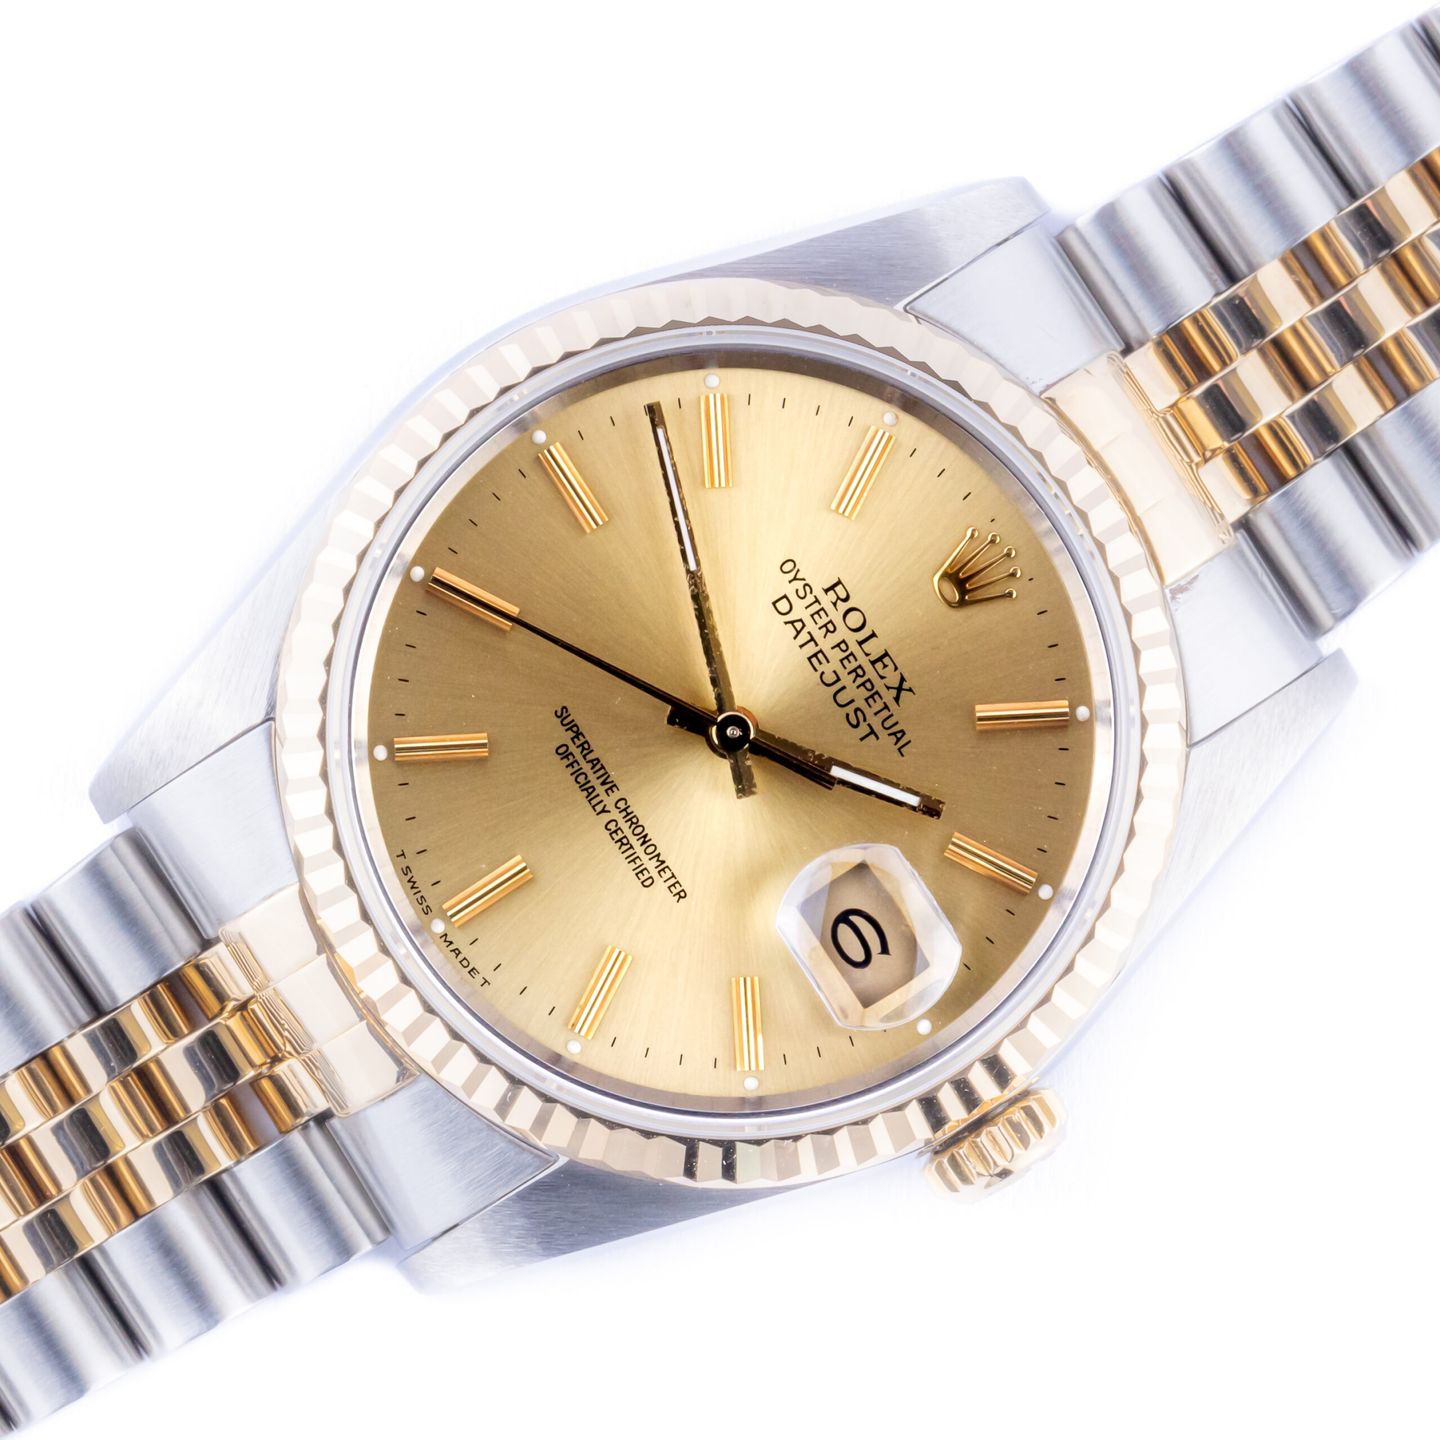 Rolex Datejust 36 16233 (1990) - Champagne dial 36 mm Gold/Steel case (1/8)